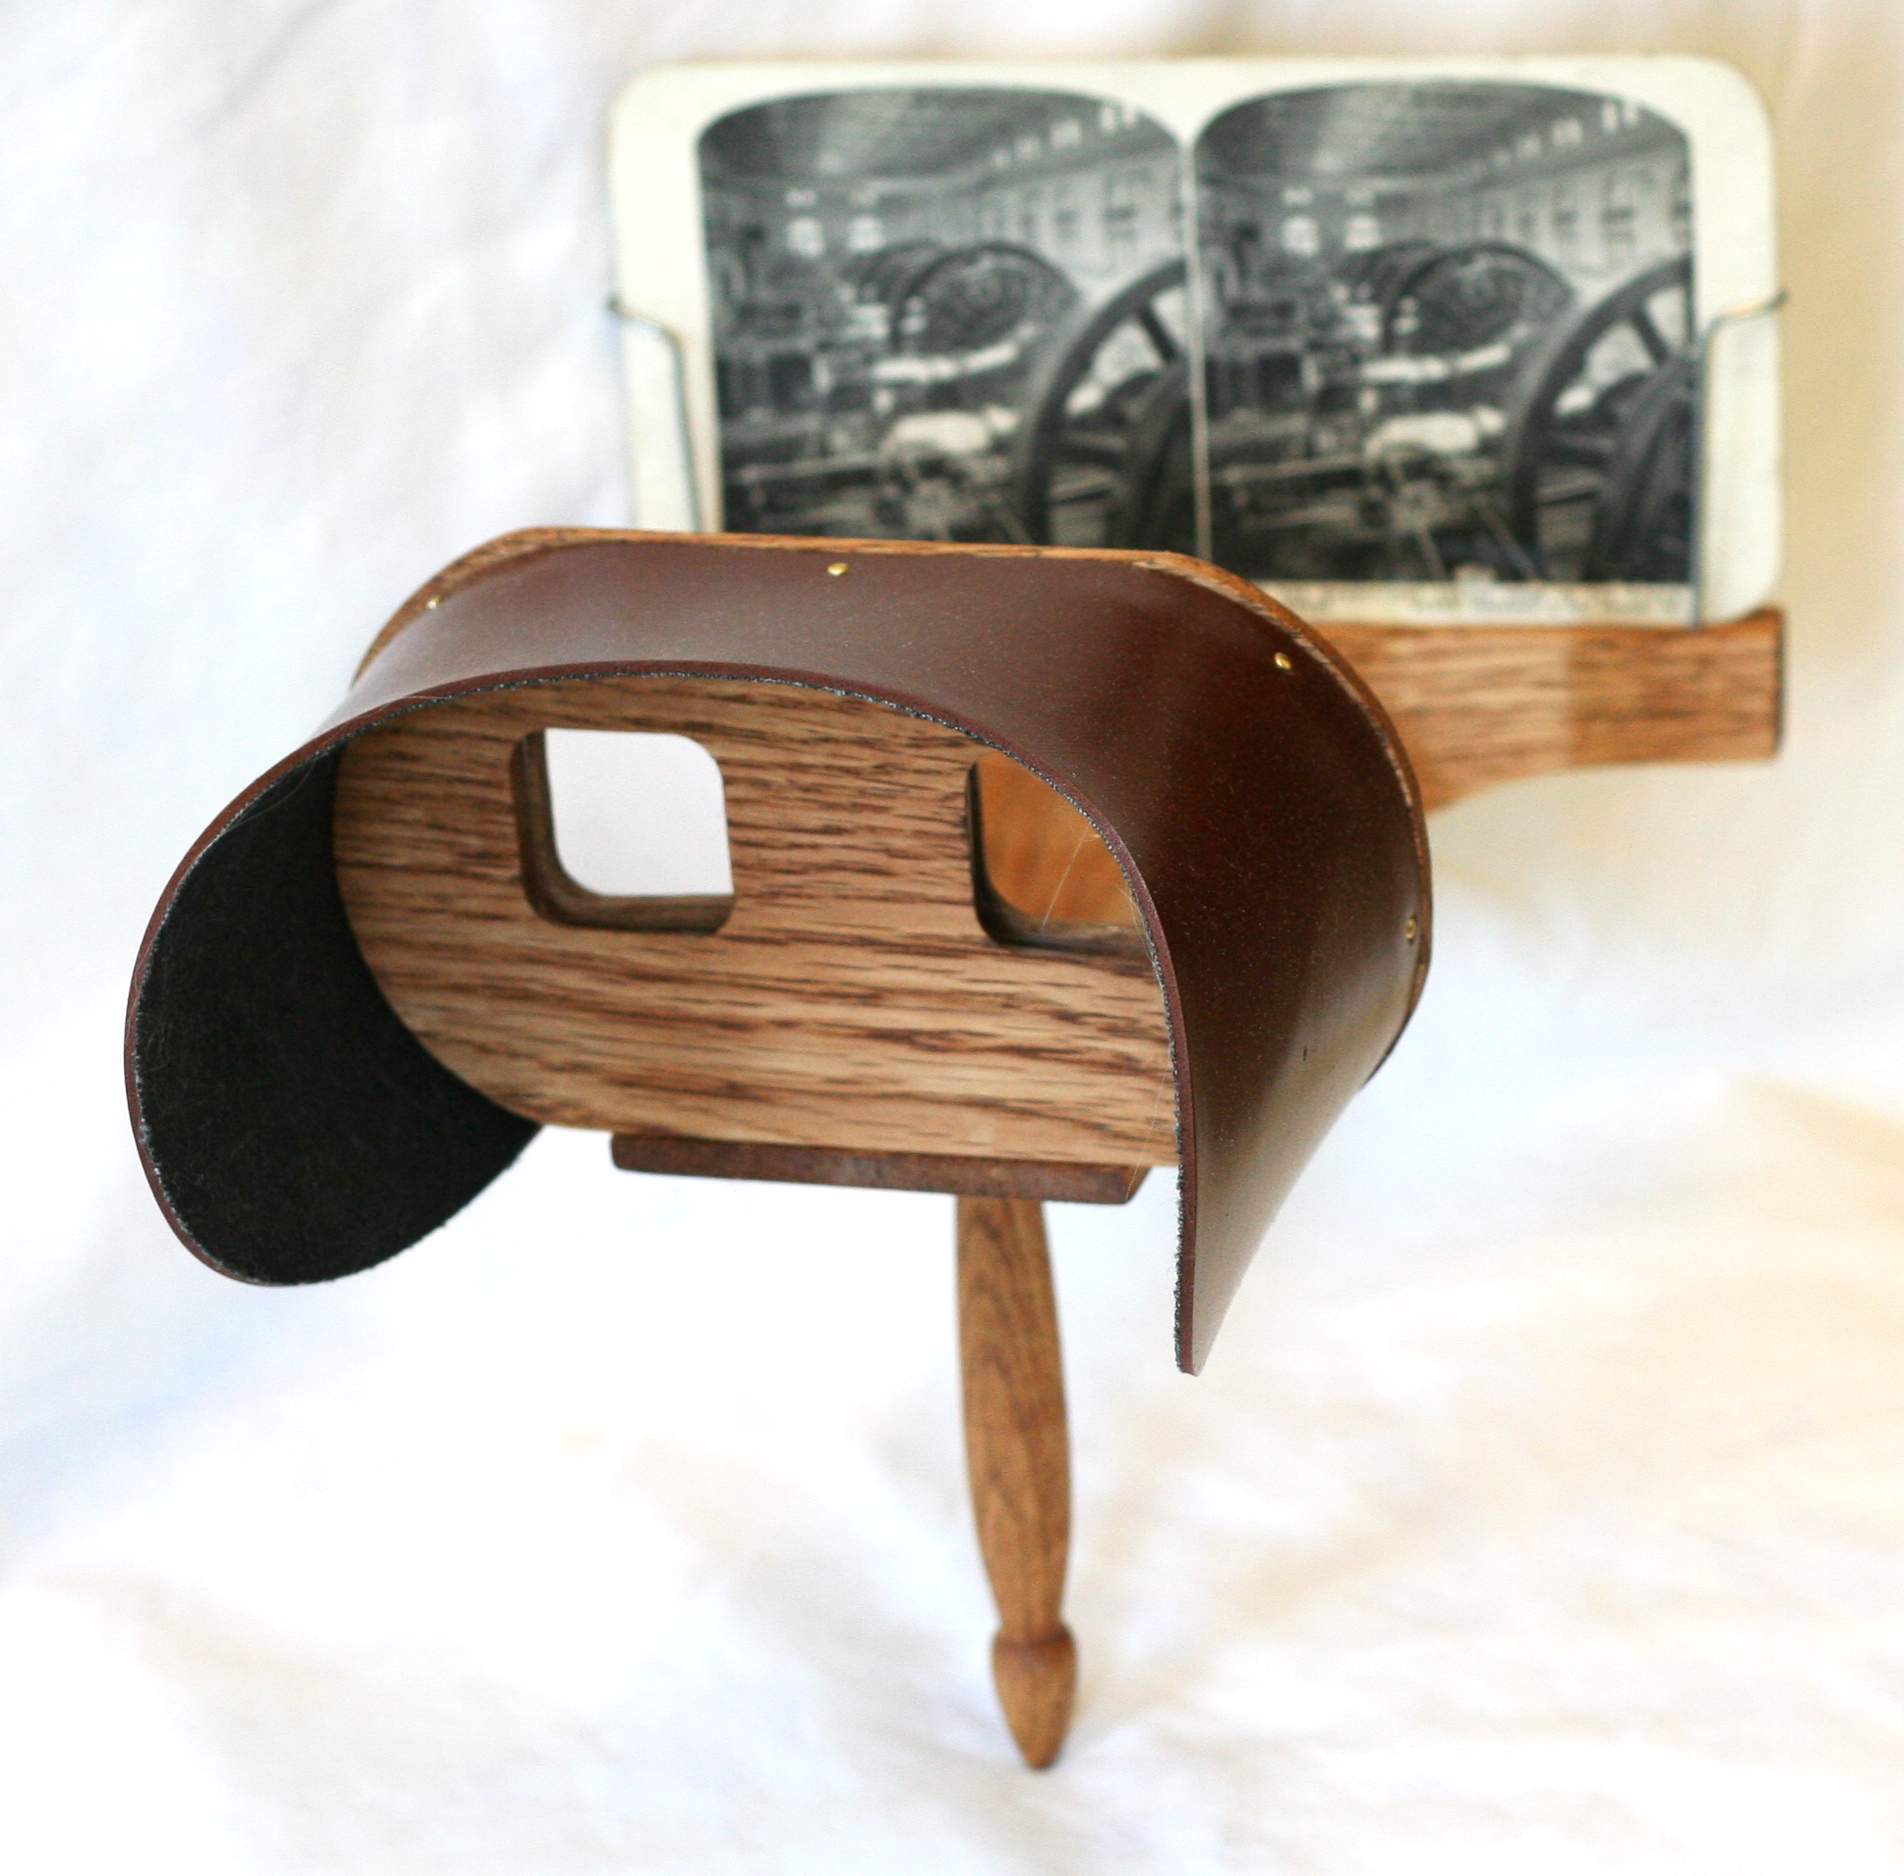 An image of the classic stereoscope